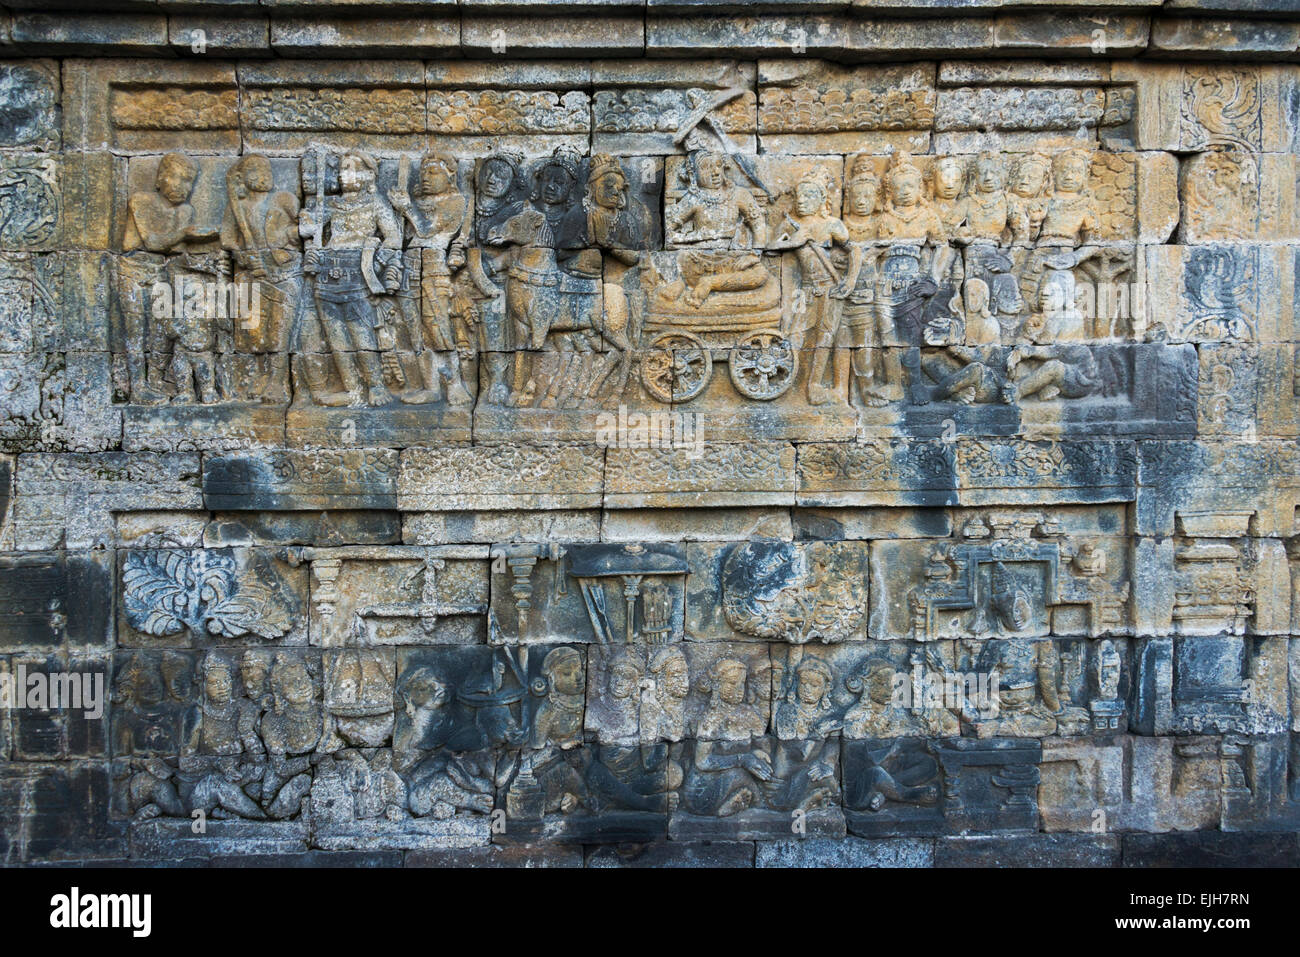 Stone carving at Borobudur, UNESCO World Heritage site, Magelang,Central Java, Indonesia Stock Photo